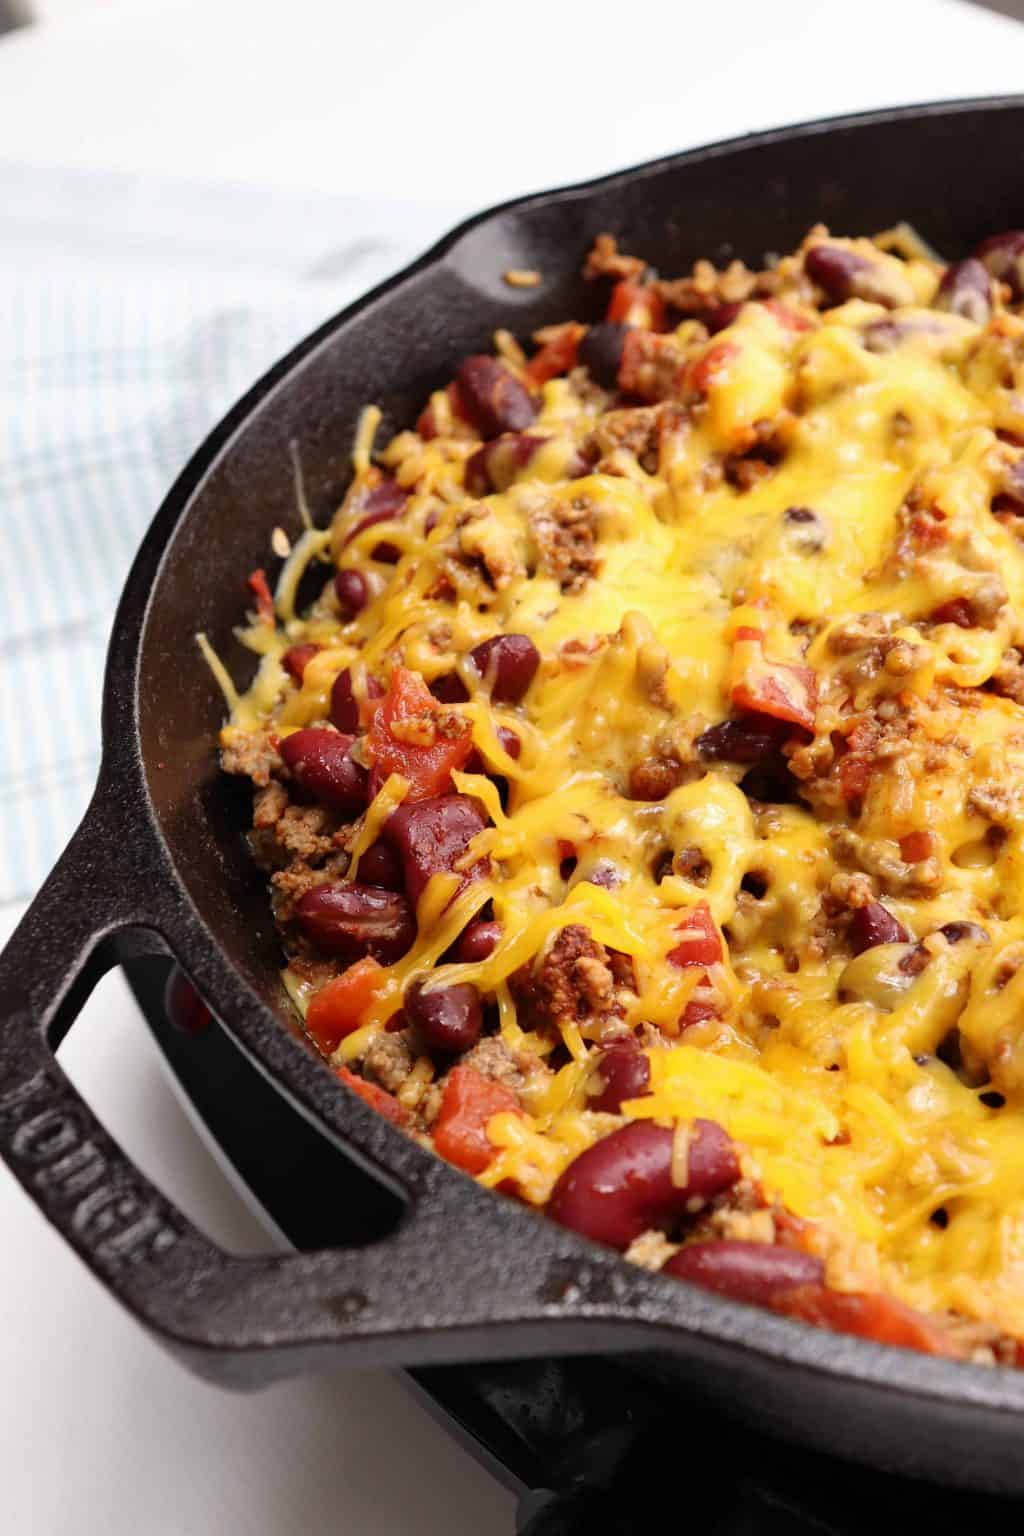 Chili Bake (Easy One Skillet Casserole Recipe) - Southern Plate